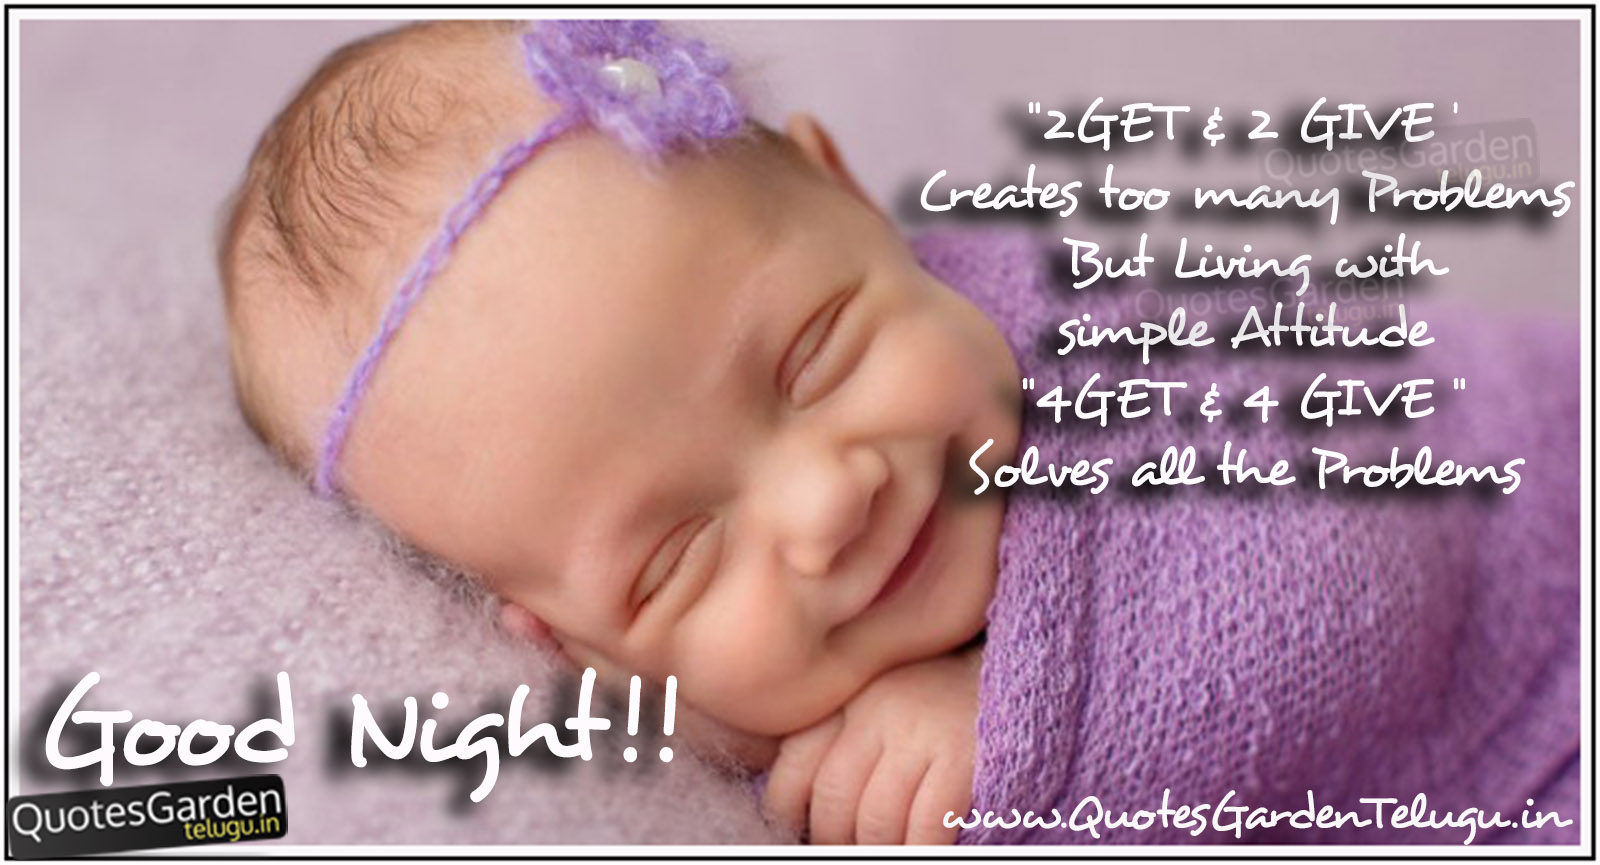 Good night Greetings messages with Cute kids wallpapers | QUOTES ...